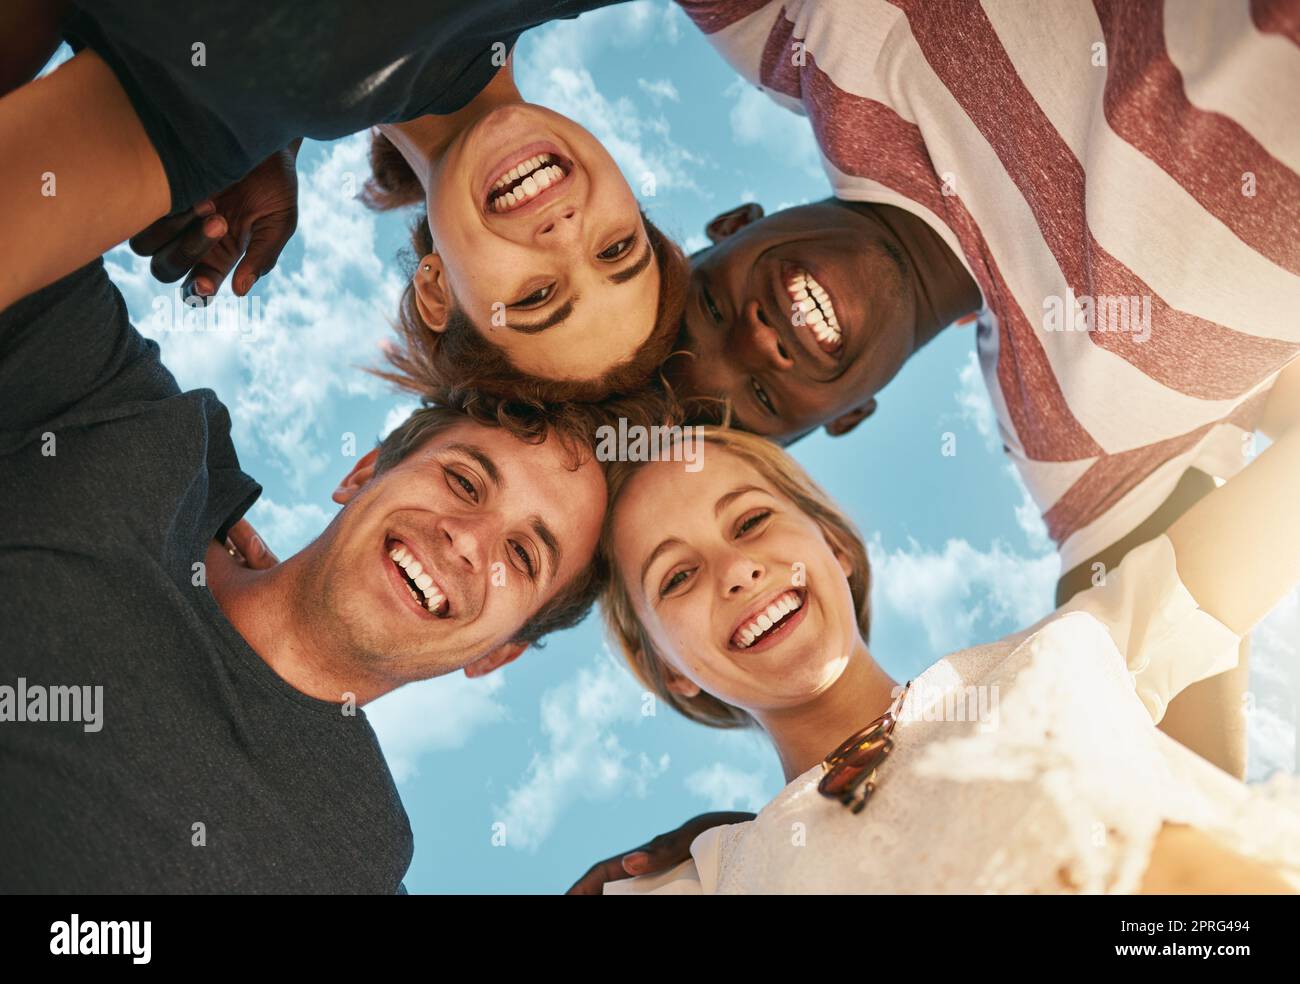 Its happy time. Low angle shot of a group of young friends huddled together in solidarity. Stock Photo